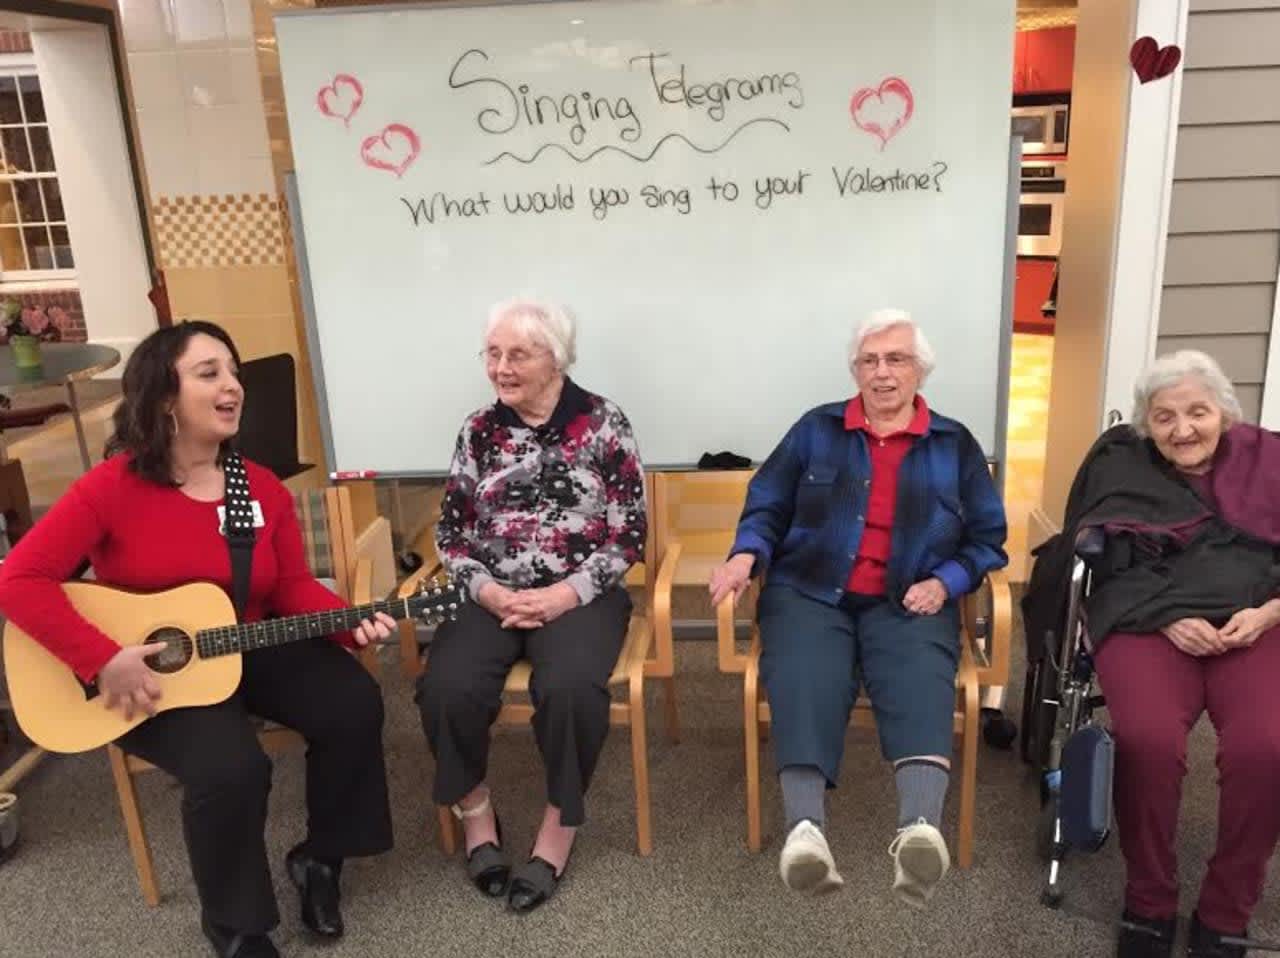 Waveny LifeCare Network in New Canaan had a special Valentine’s themed day called “Love is a Work of Heart" in its Adult Day Program.